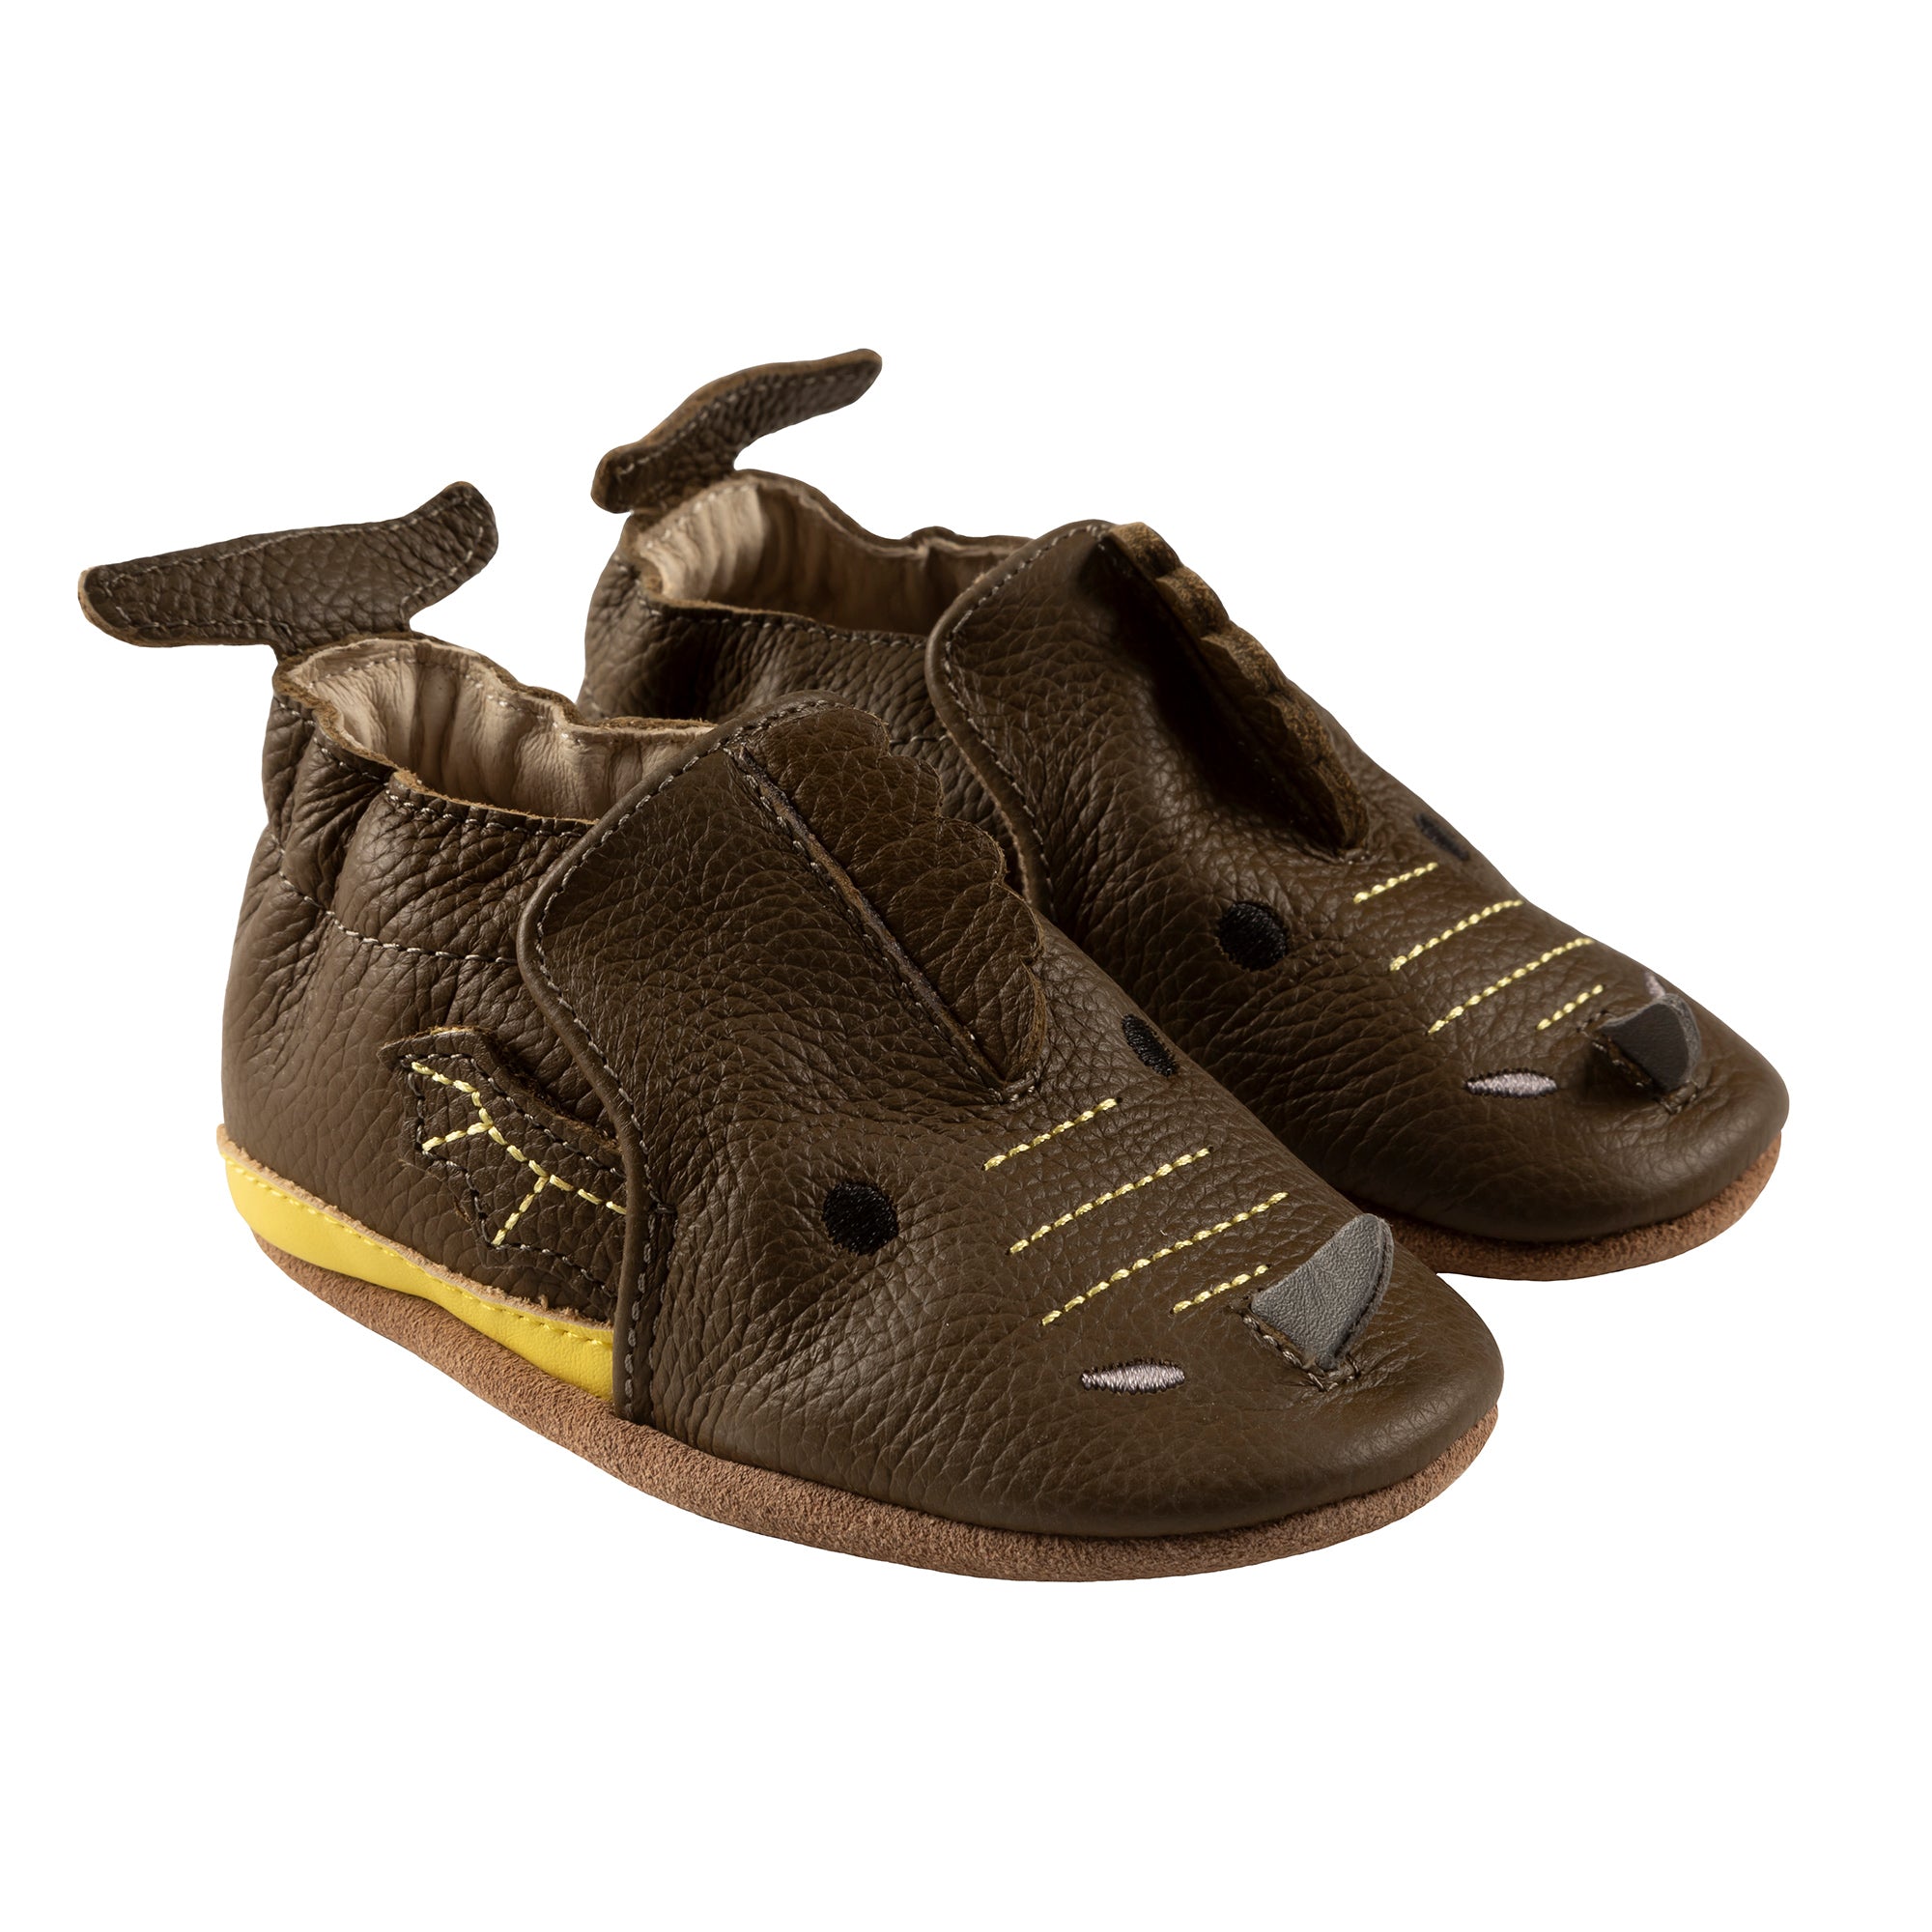 Robeez Soft Sole Shoes - Animal